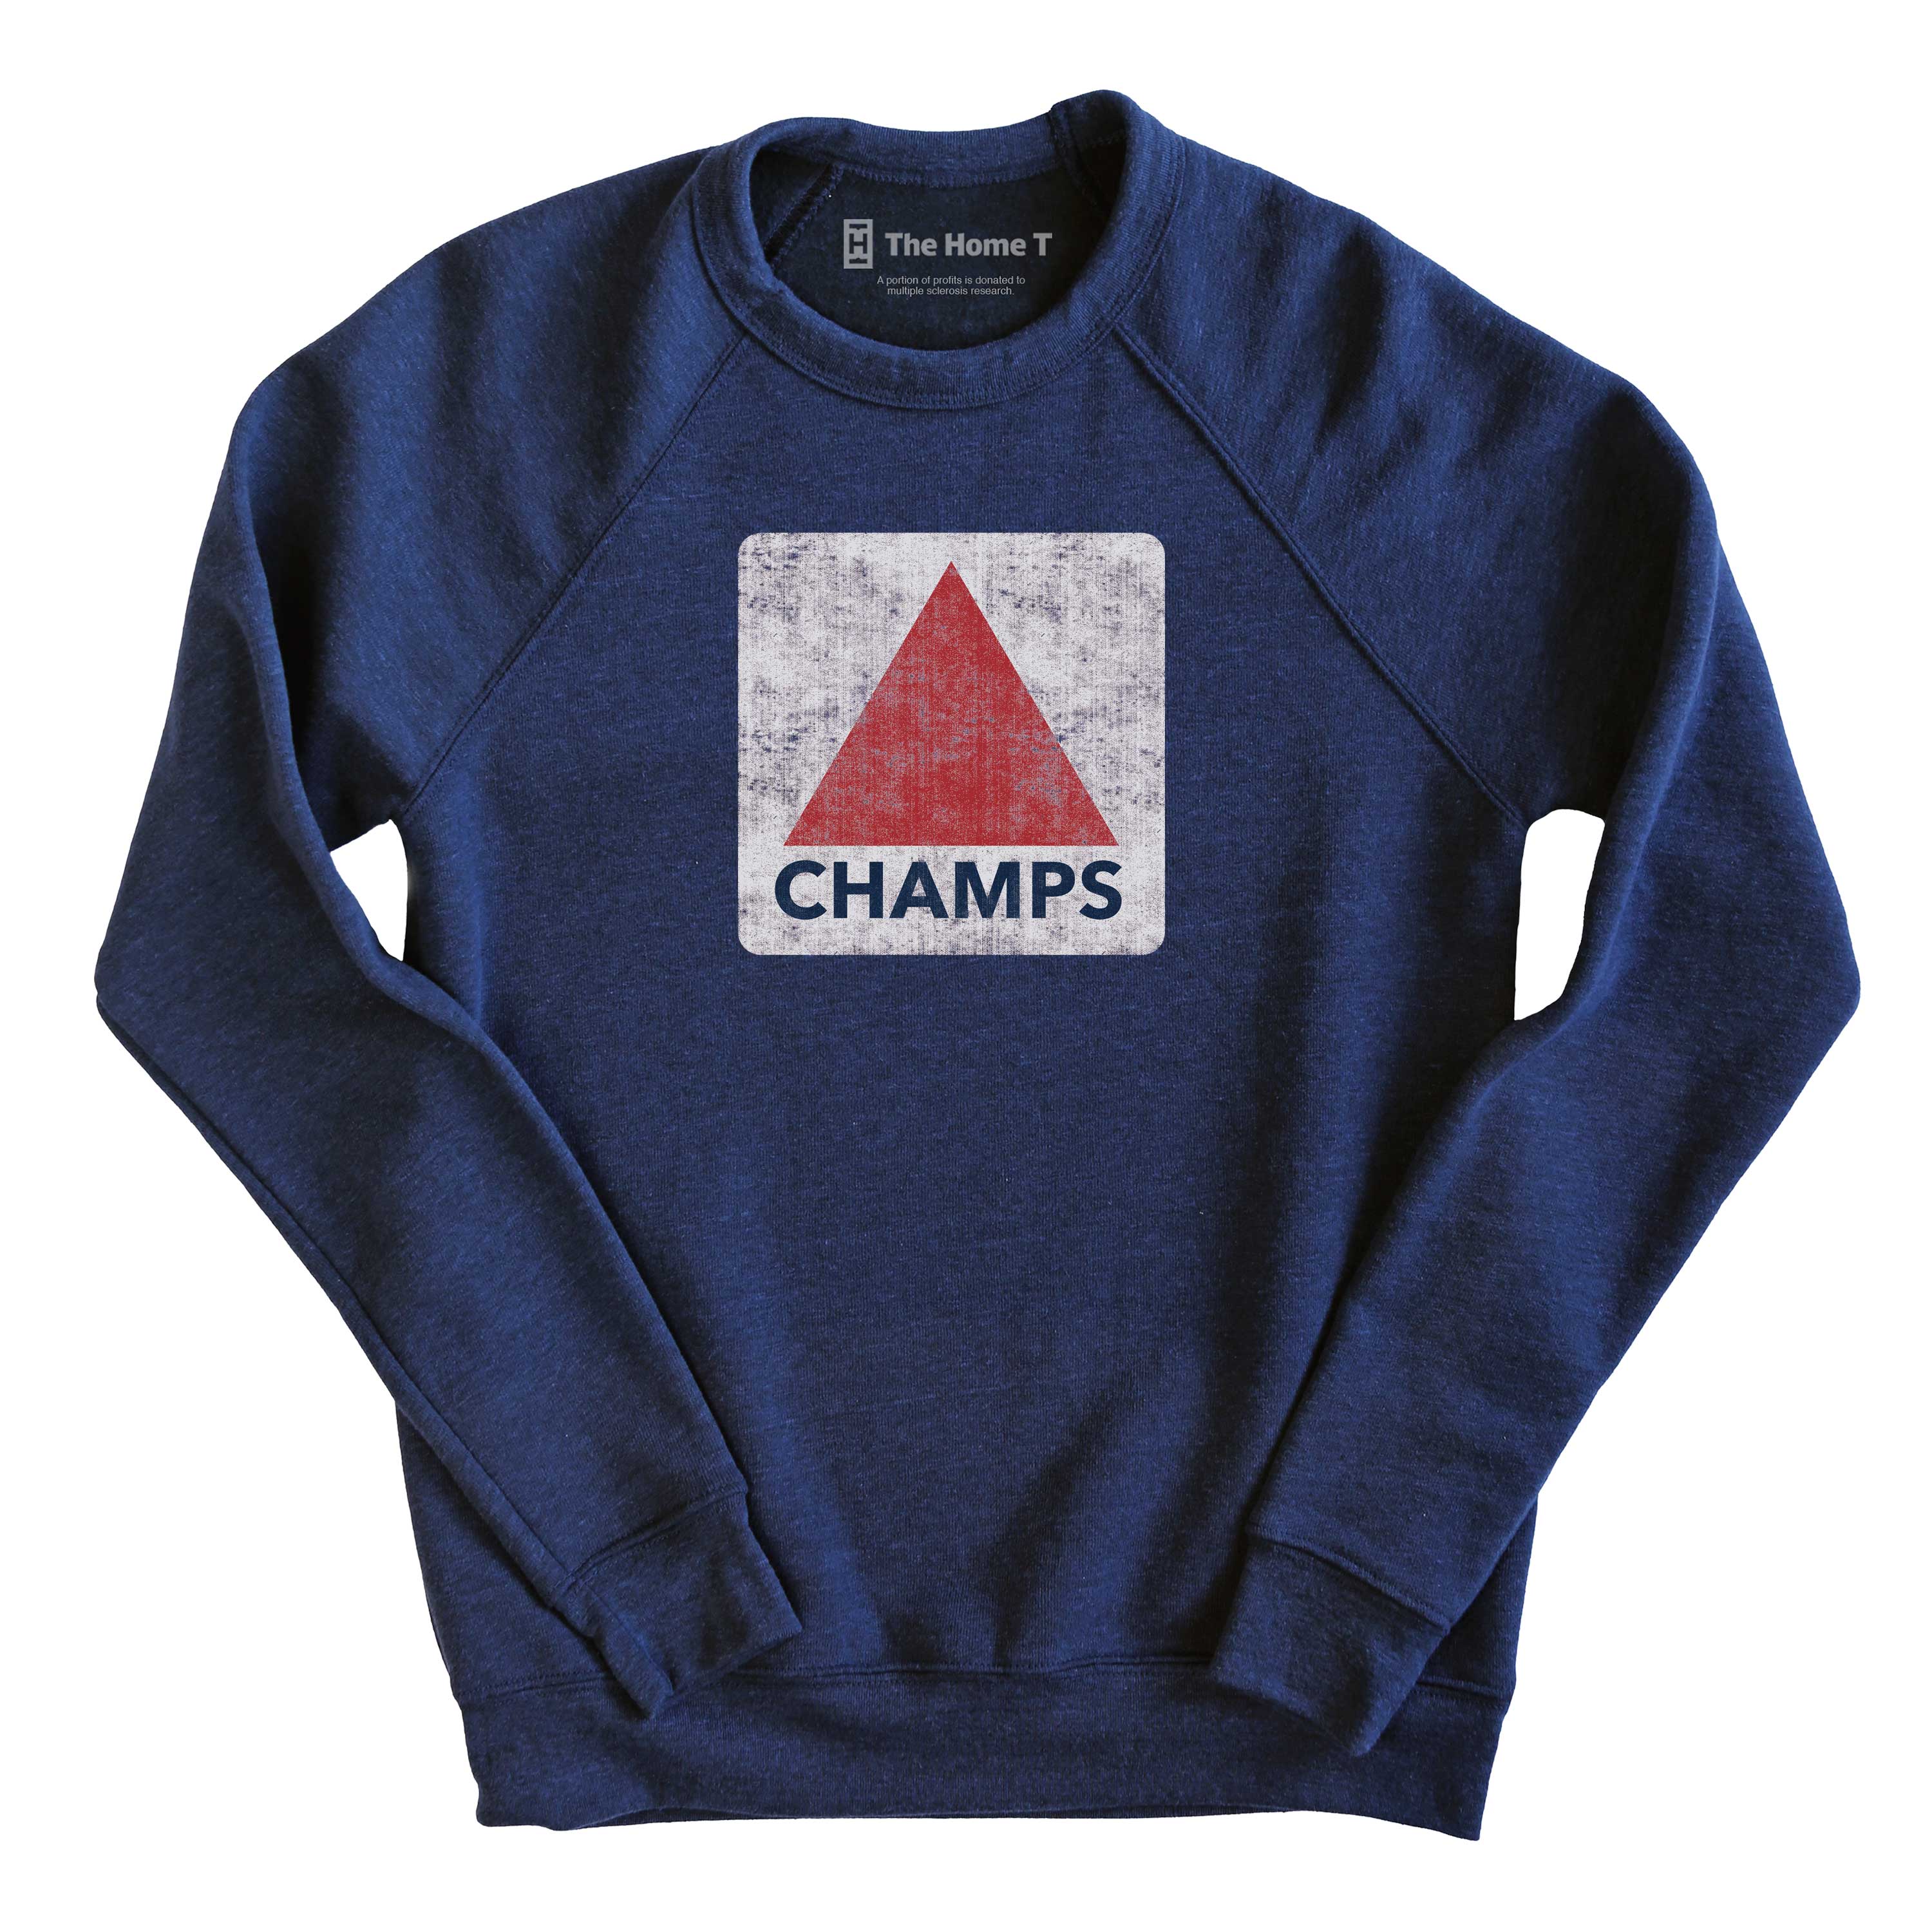 Outfield Champs Sign Crew neck The Home T XXL Sweatshirt